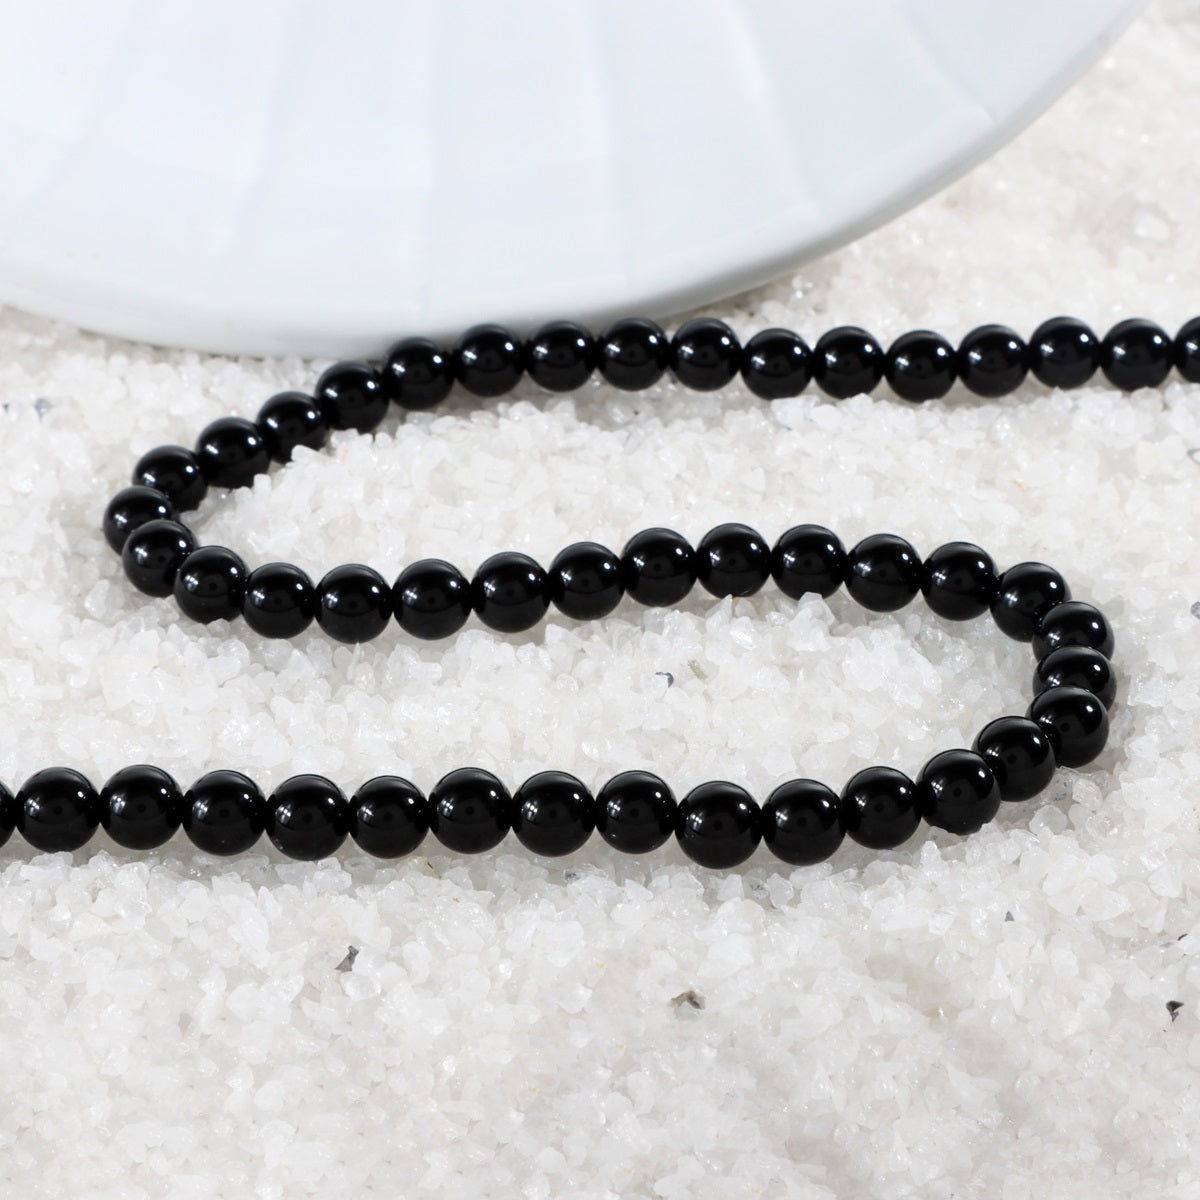 Men's Black Onyx Gemstone Silver Necklace: Empowering and masculine